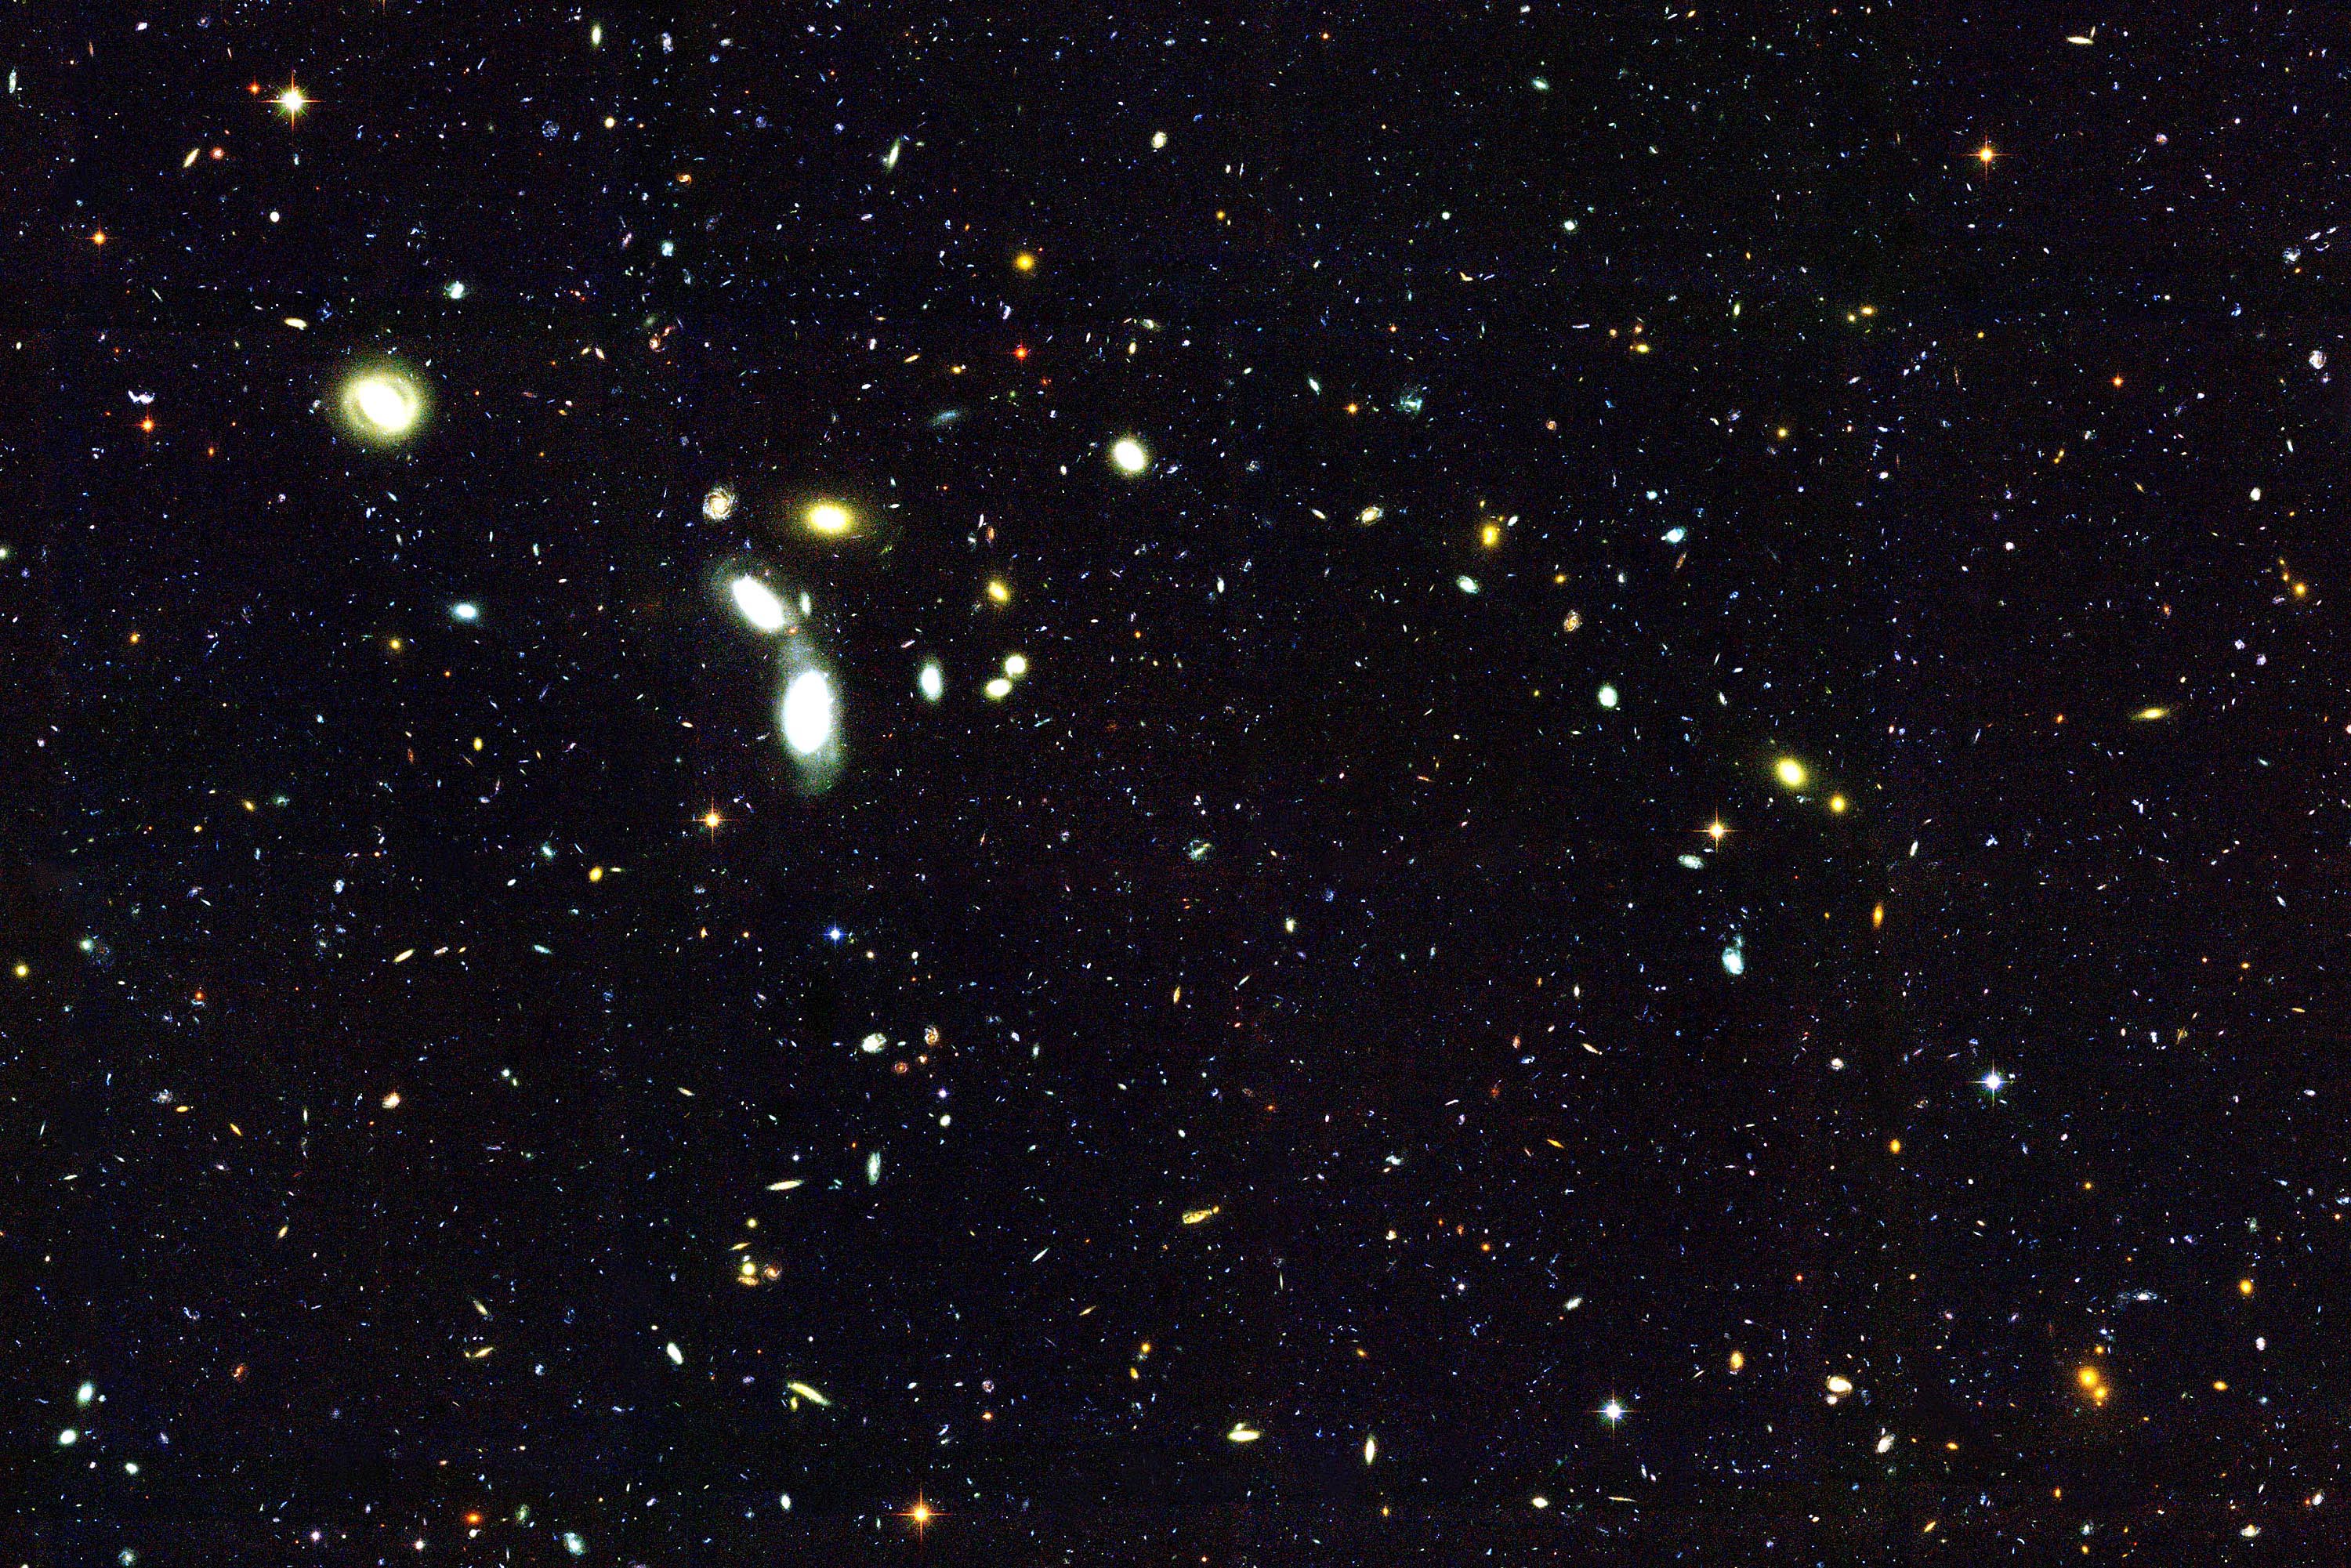 NASA's Hubble Space Telescope reached back to nearly the beginning of time to sample thousands of infant galaxies. This image, taken with Hubble's Advanced Camera for Surveys, shows several thousand galaxies, many of which appear to be interacting or in the process of forming. (NASA&mdash;WireImage)